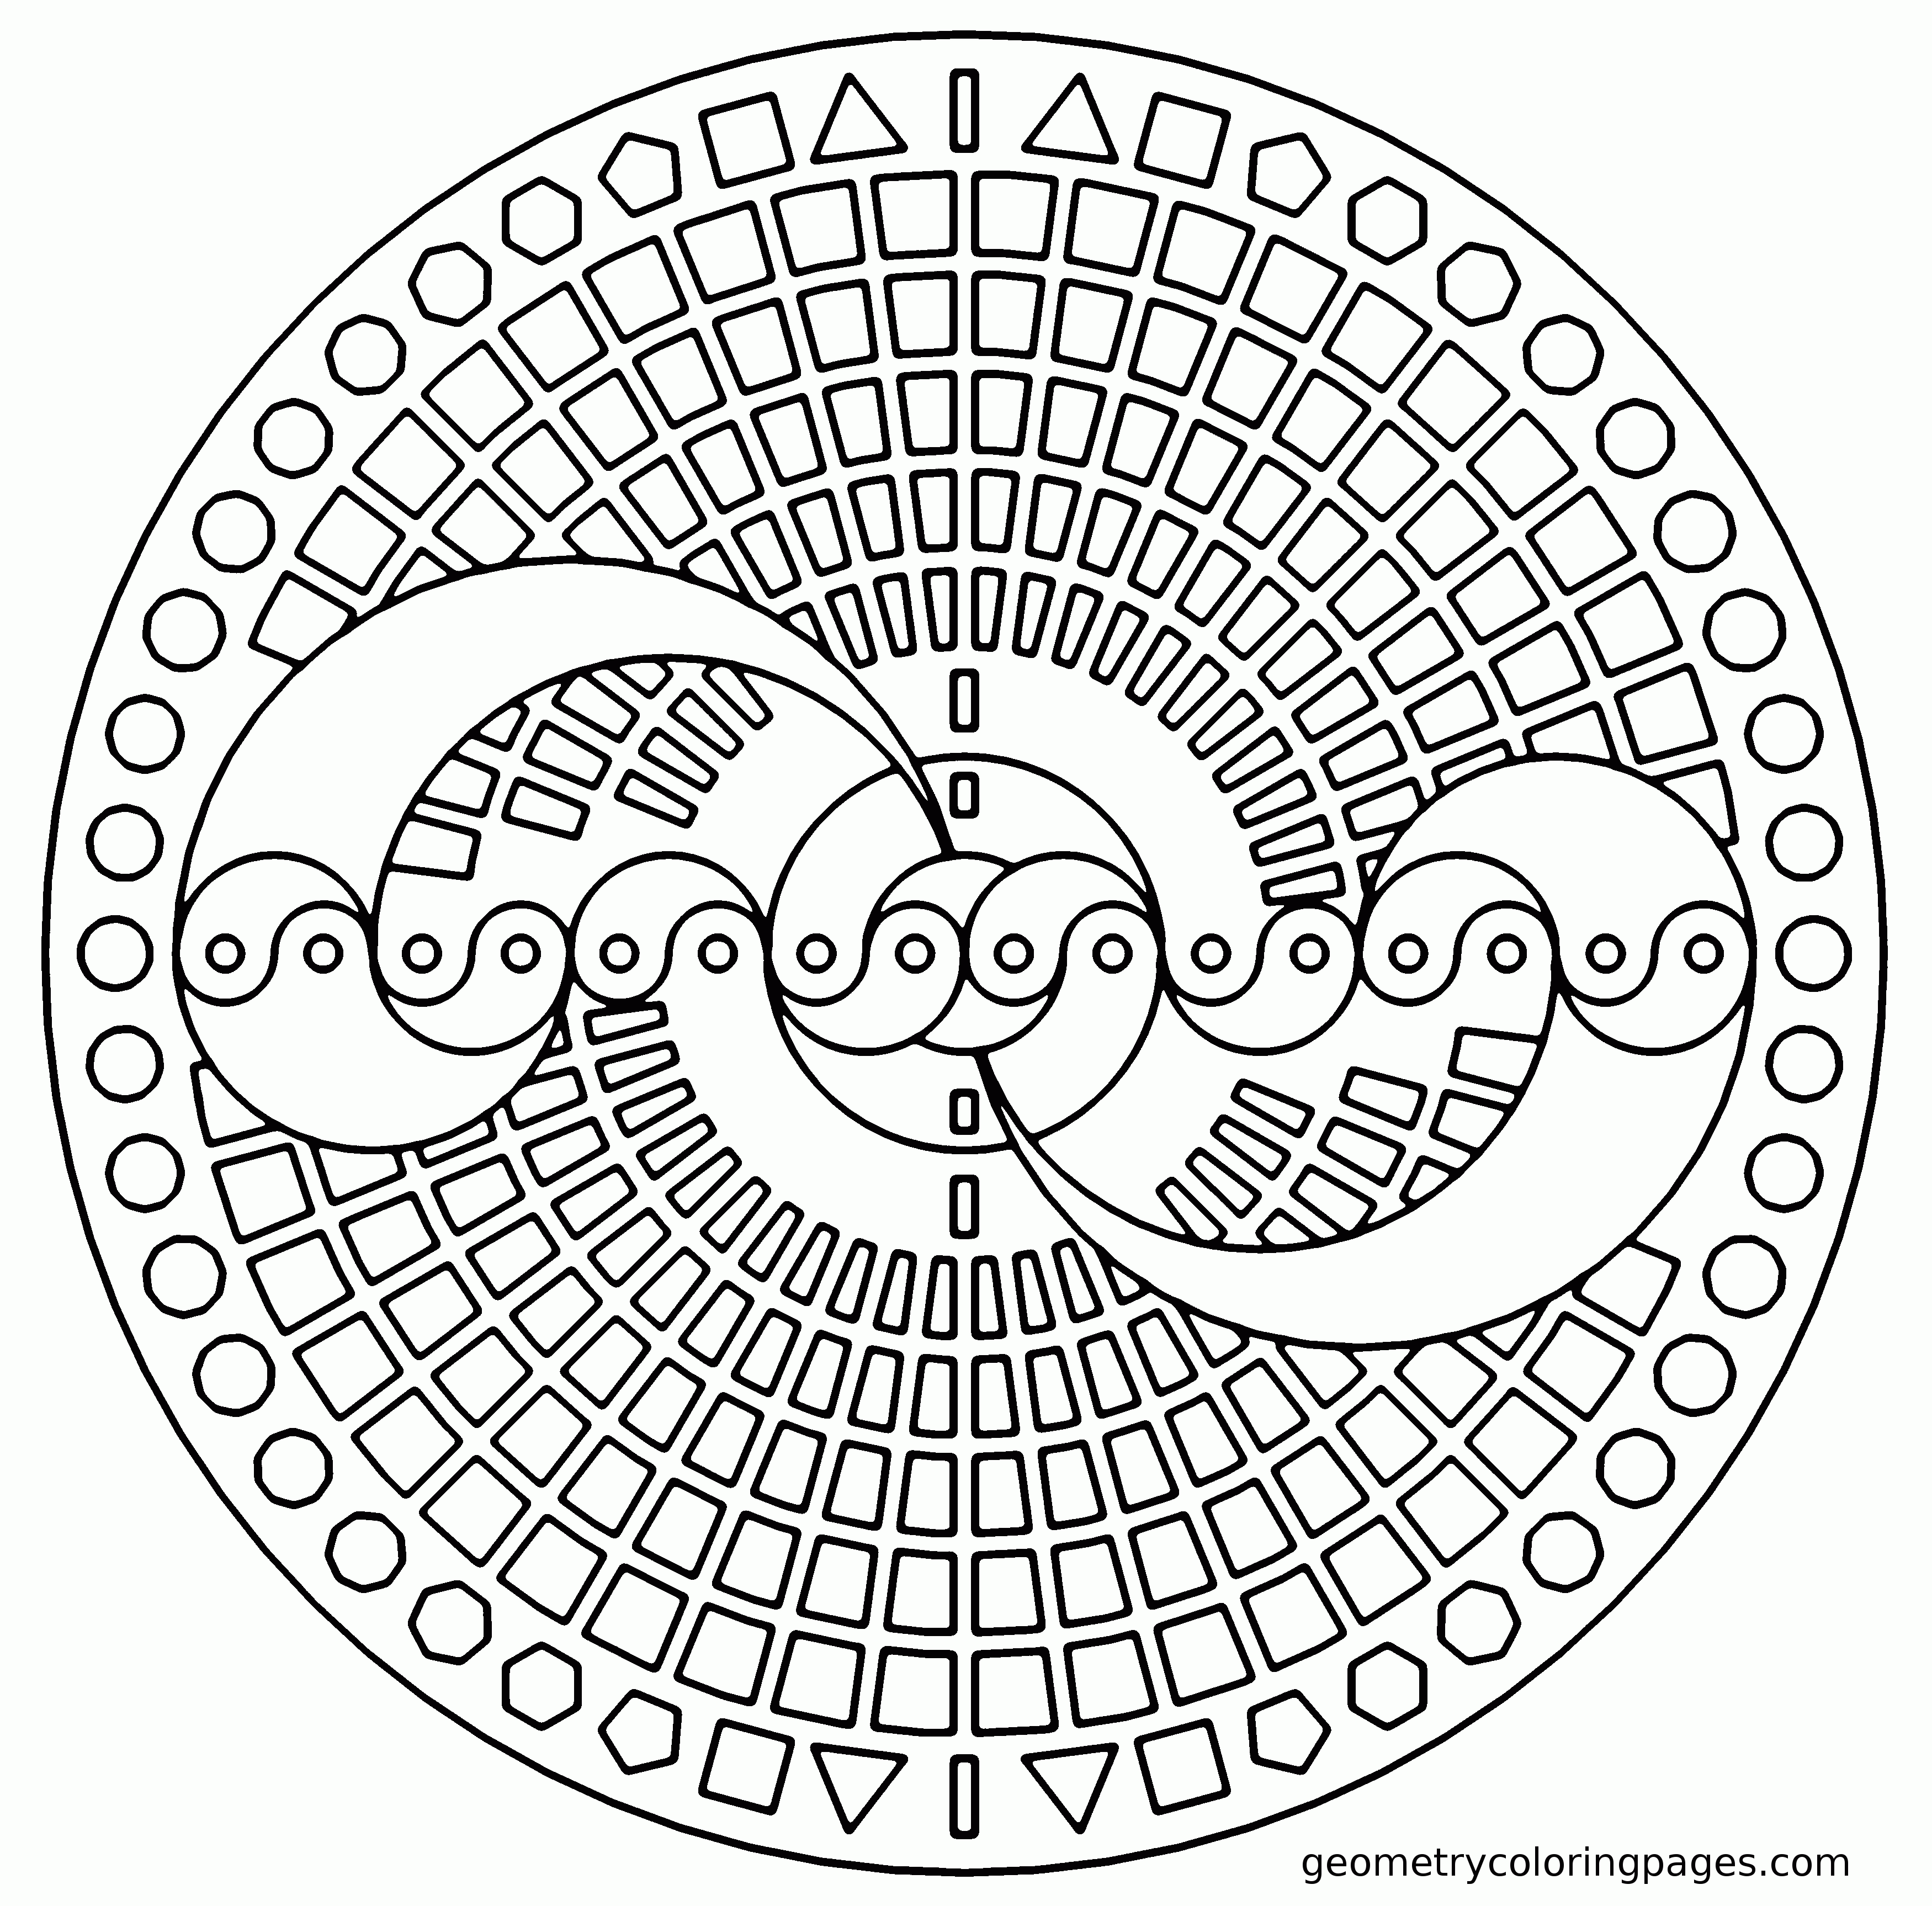 geometric coloring pages for adults free free printable adult coloring pages geometric coloring for free pages coloring adults geometric 